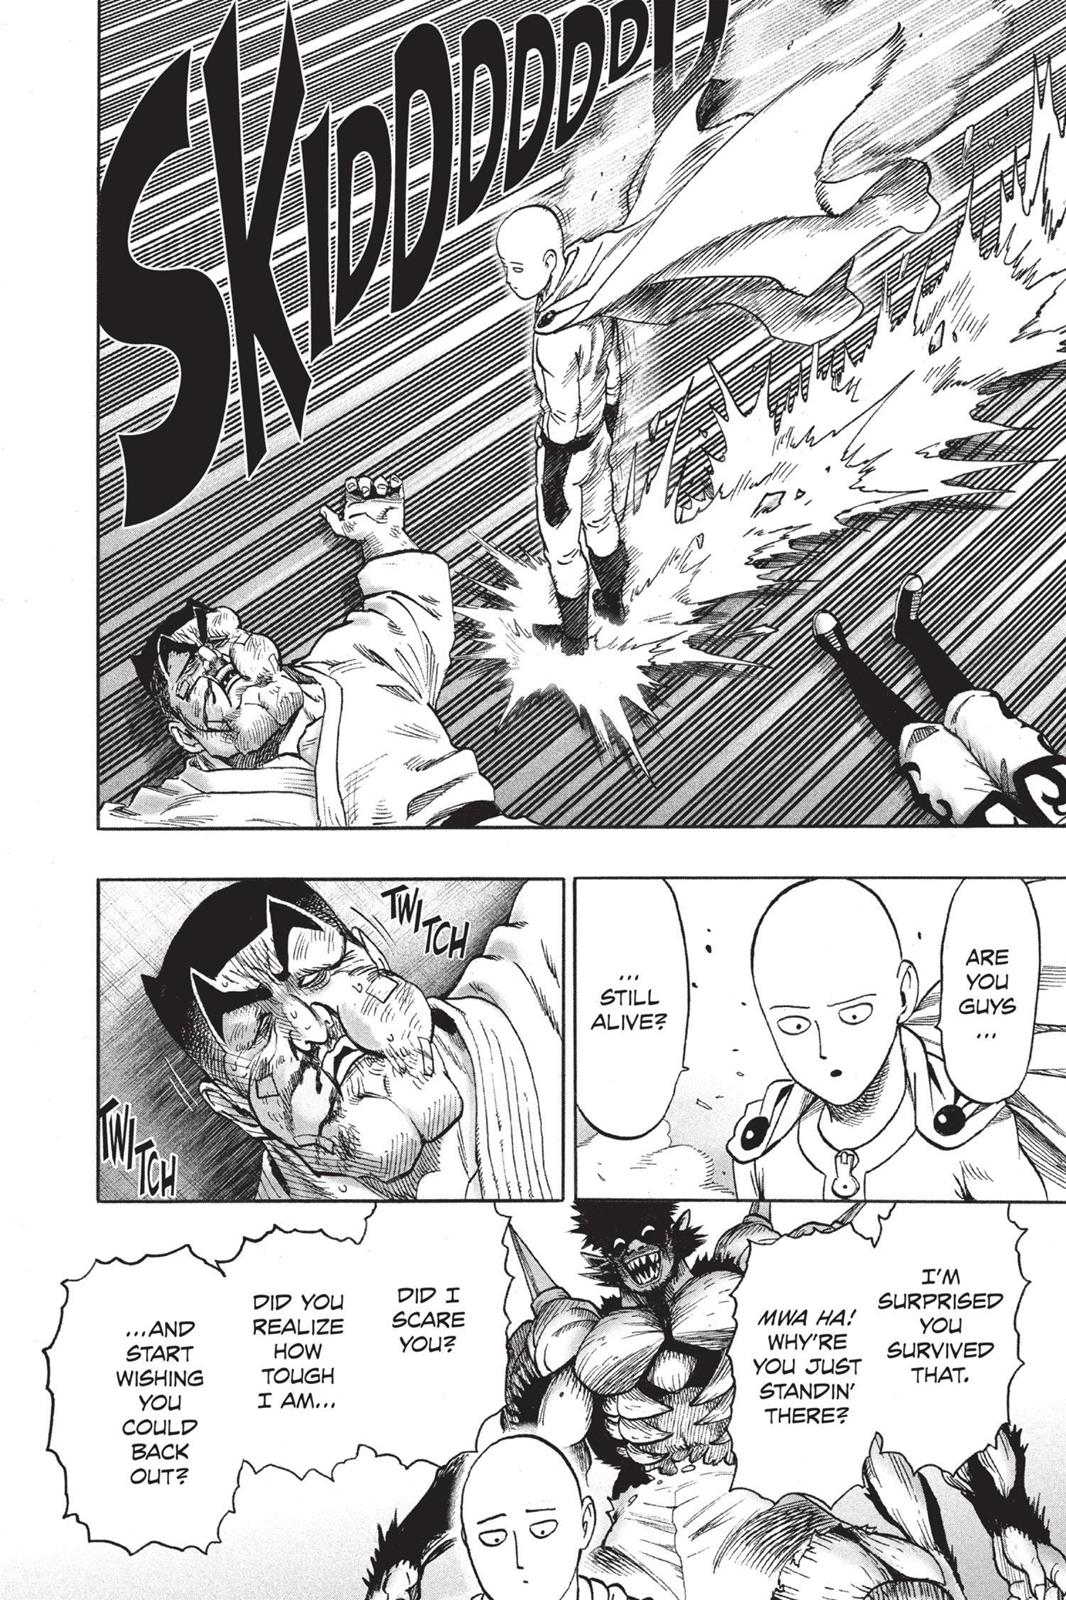 One-Punch Man, Punch 75 image 08